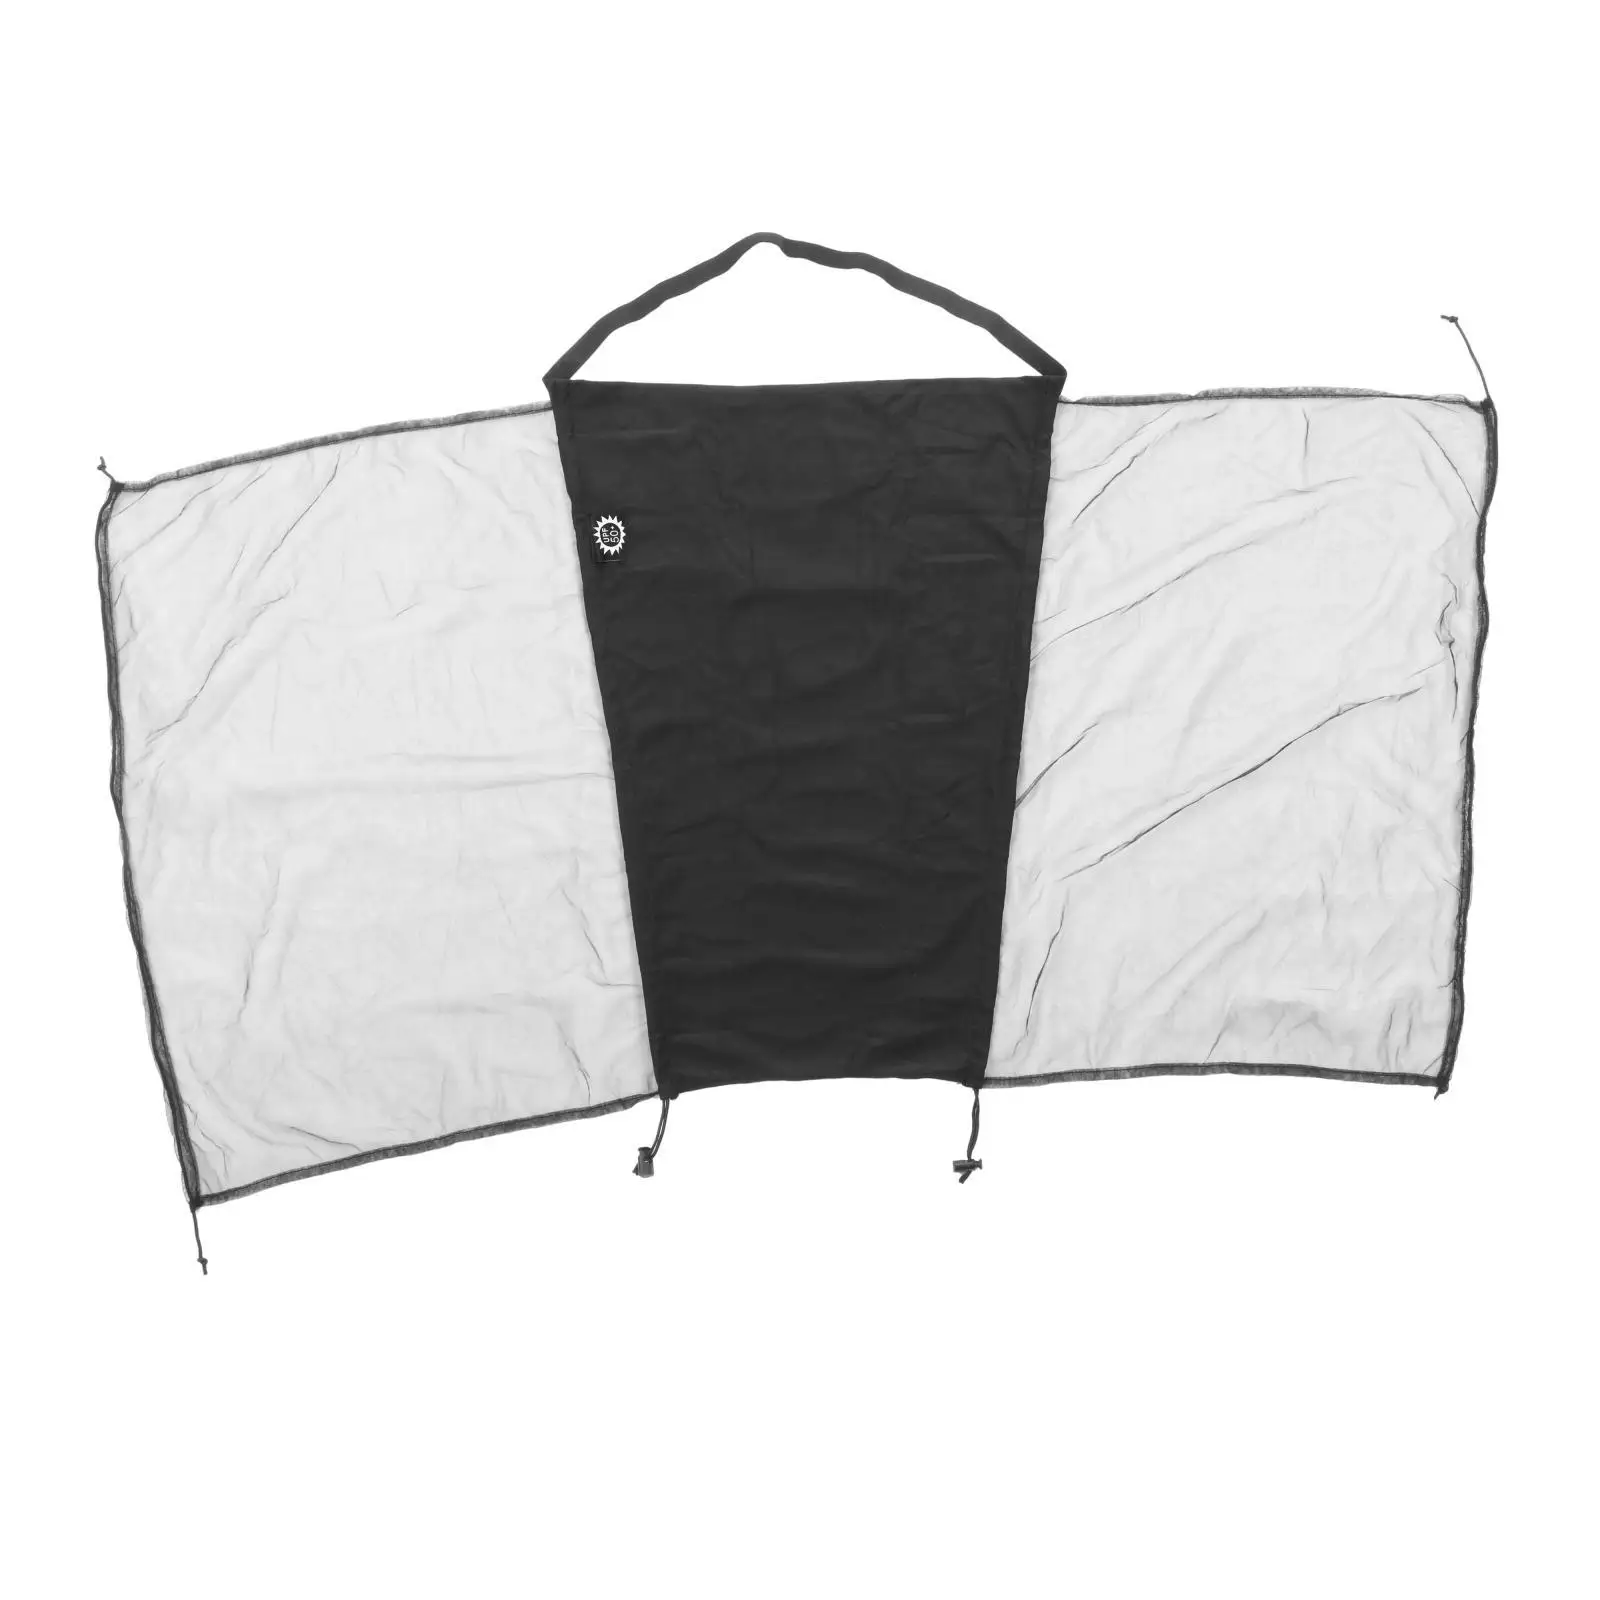 Infant Stroller Sun Cover Sun Protection Cover Stroller Sun Canopy Prevents Baby from Sun Burns for Most Stroller